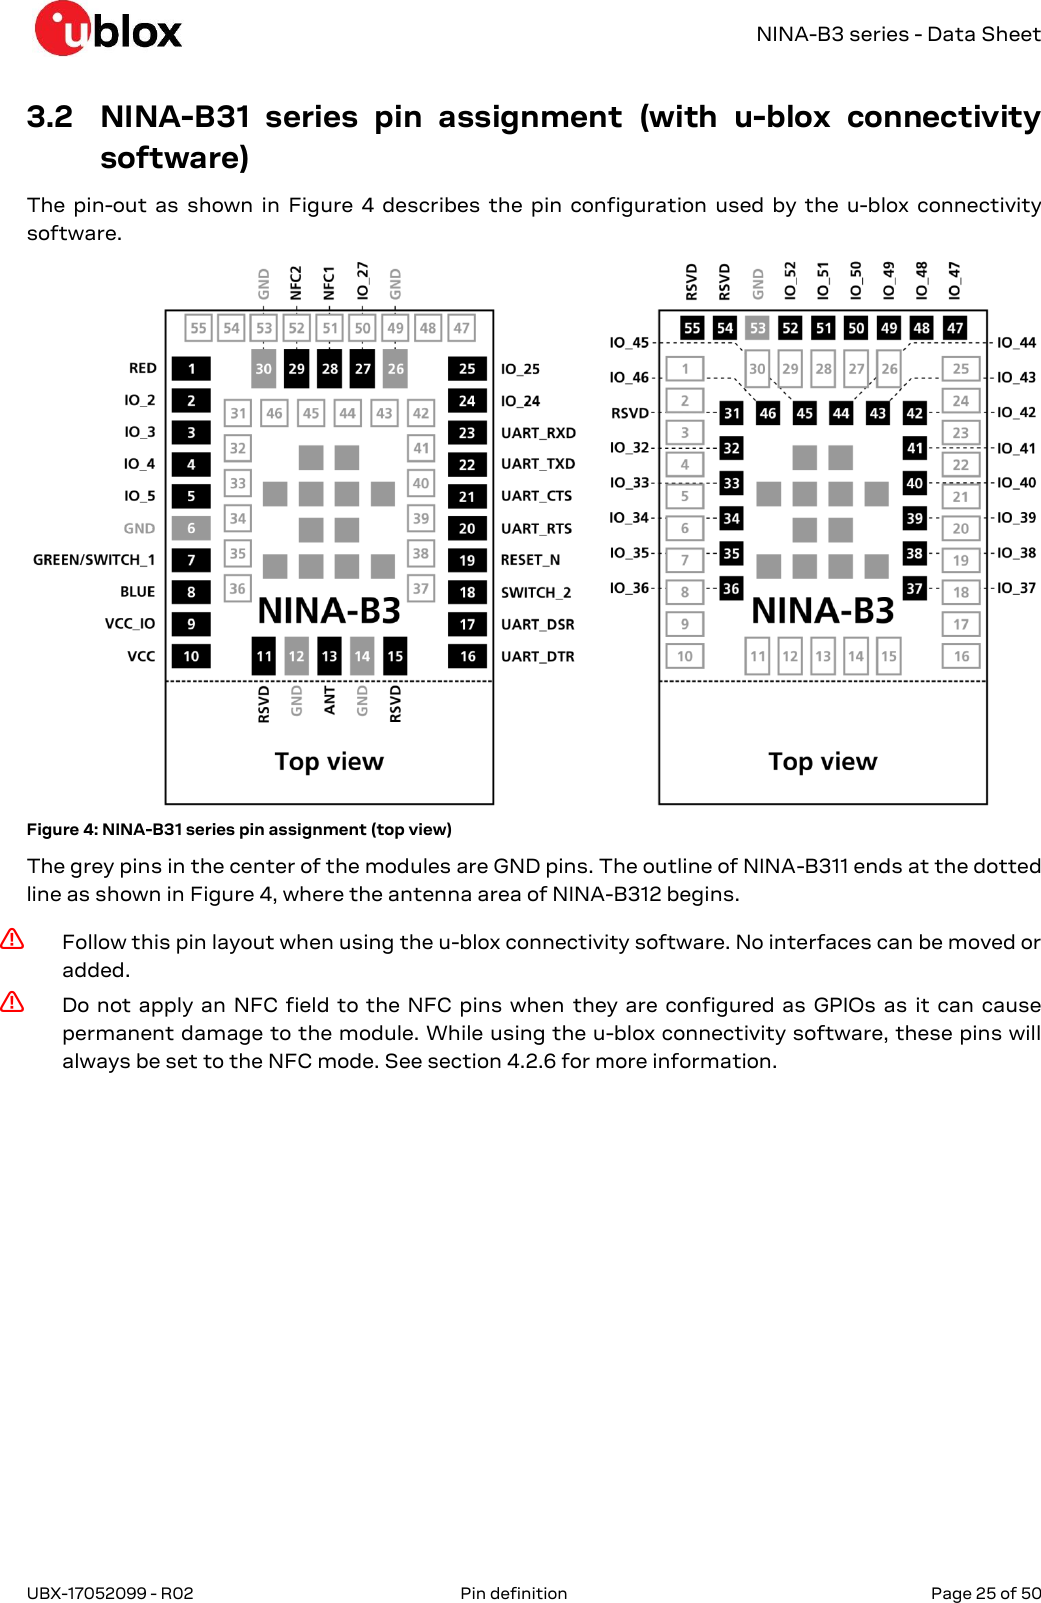   NINA-B3 series - Data Sheet UBX-17052099 - R02  Pin definition   Page 25 of 50      3.2 NINA-B31  series  pin  assignment  (with  u-blox  connectivity software) The pin-out as shown  in  Figure 4  describes the  pin  configuration used  by  the u-blox connectivity software.   Figure 4: NINA-B31 series pin assignment (top view) The grey pins in the center of the modules are GND pins. The outline of NINA-B311 ends at the dotted line as shown in Figure 4, where the antenna area of NINA-B312 begins. ⚠ Follow this pin layout when using the u-blox connectivity software. No interfaces can be moved or added. ⚠ Do not apply an NFC field to the NFC pins when they are configured as GPIOs as it can cause permanent damage to the module. While using the u-blox connectivity software, these pins will always be set to the NFC mode. See section 4.2.6 for more information.  